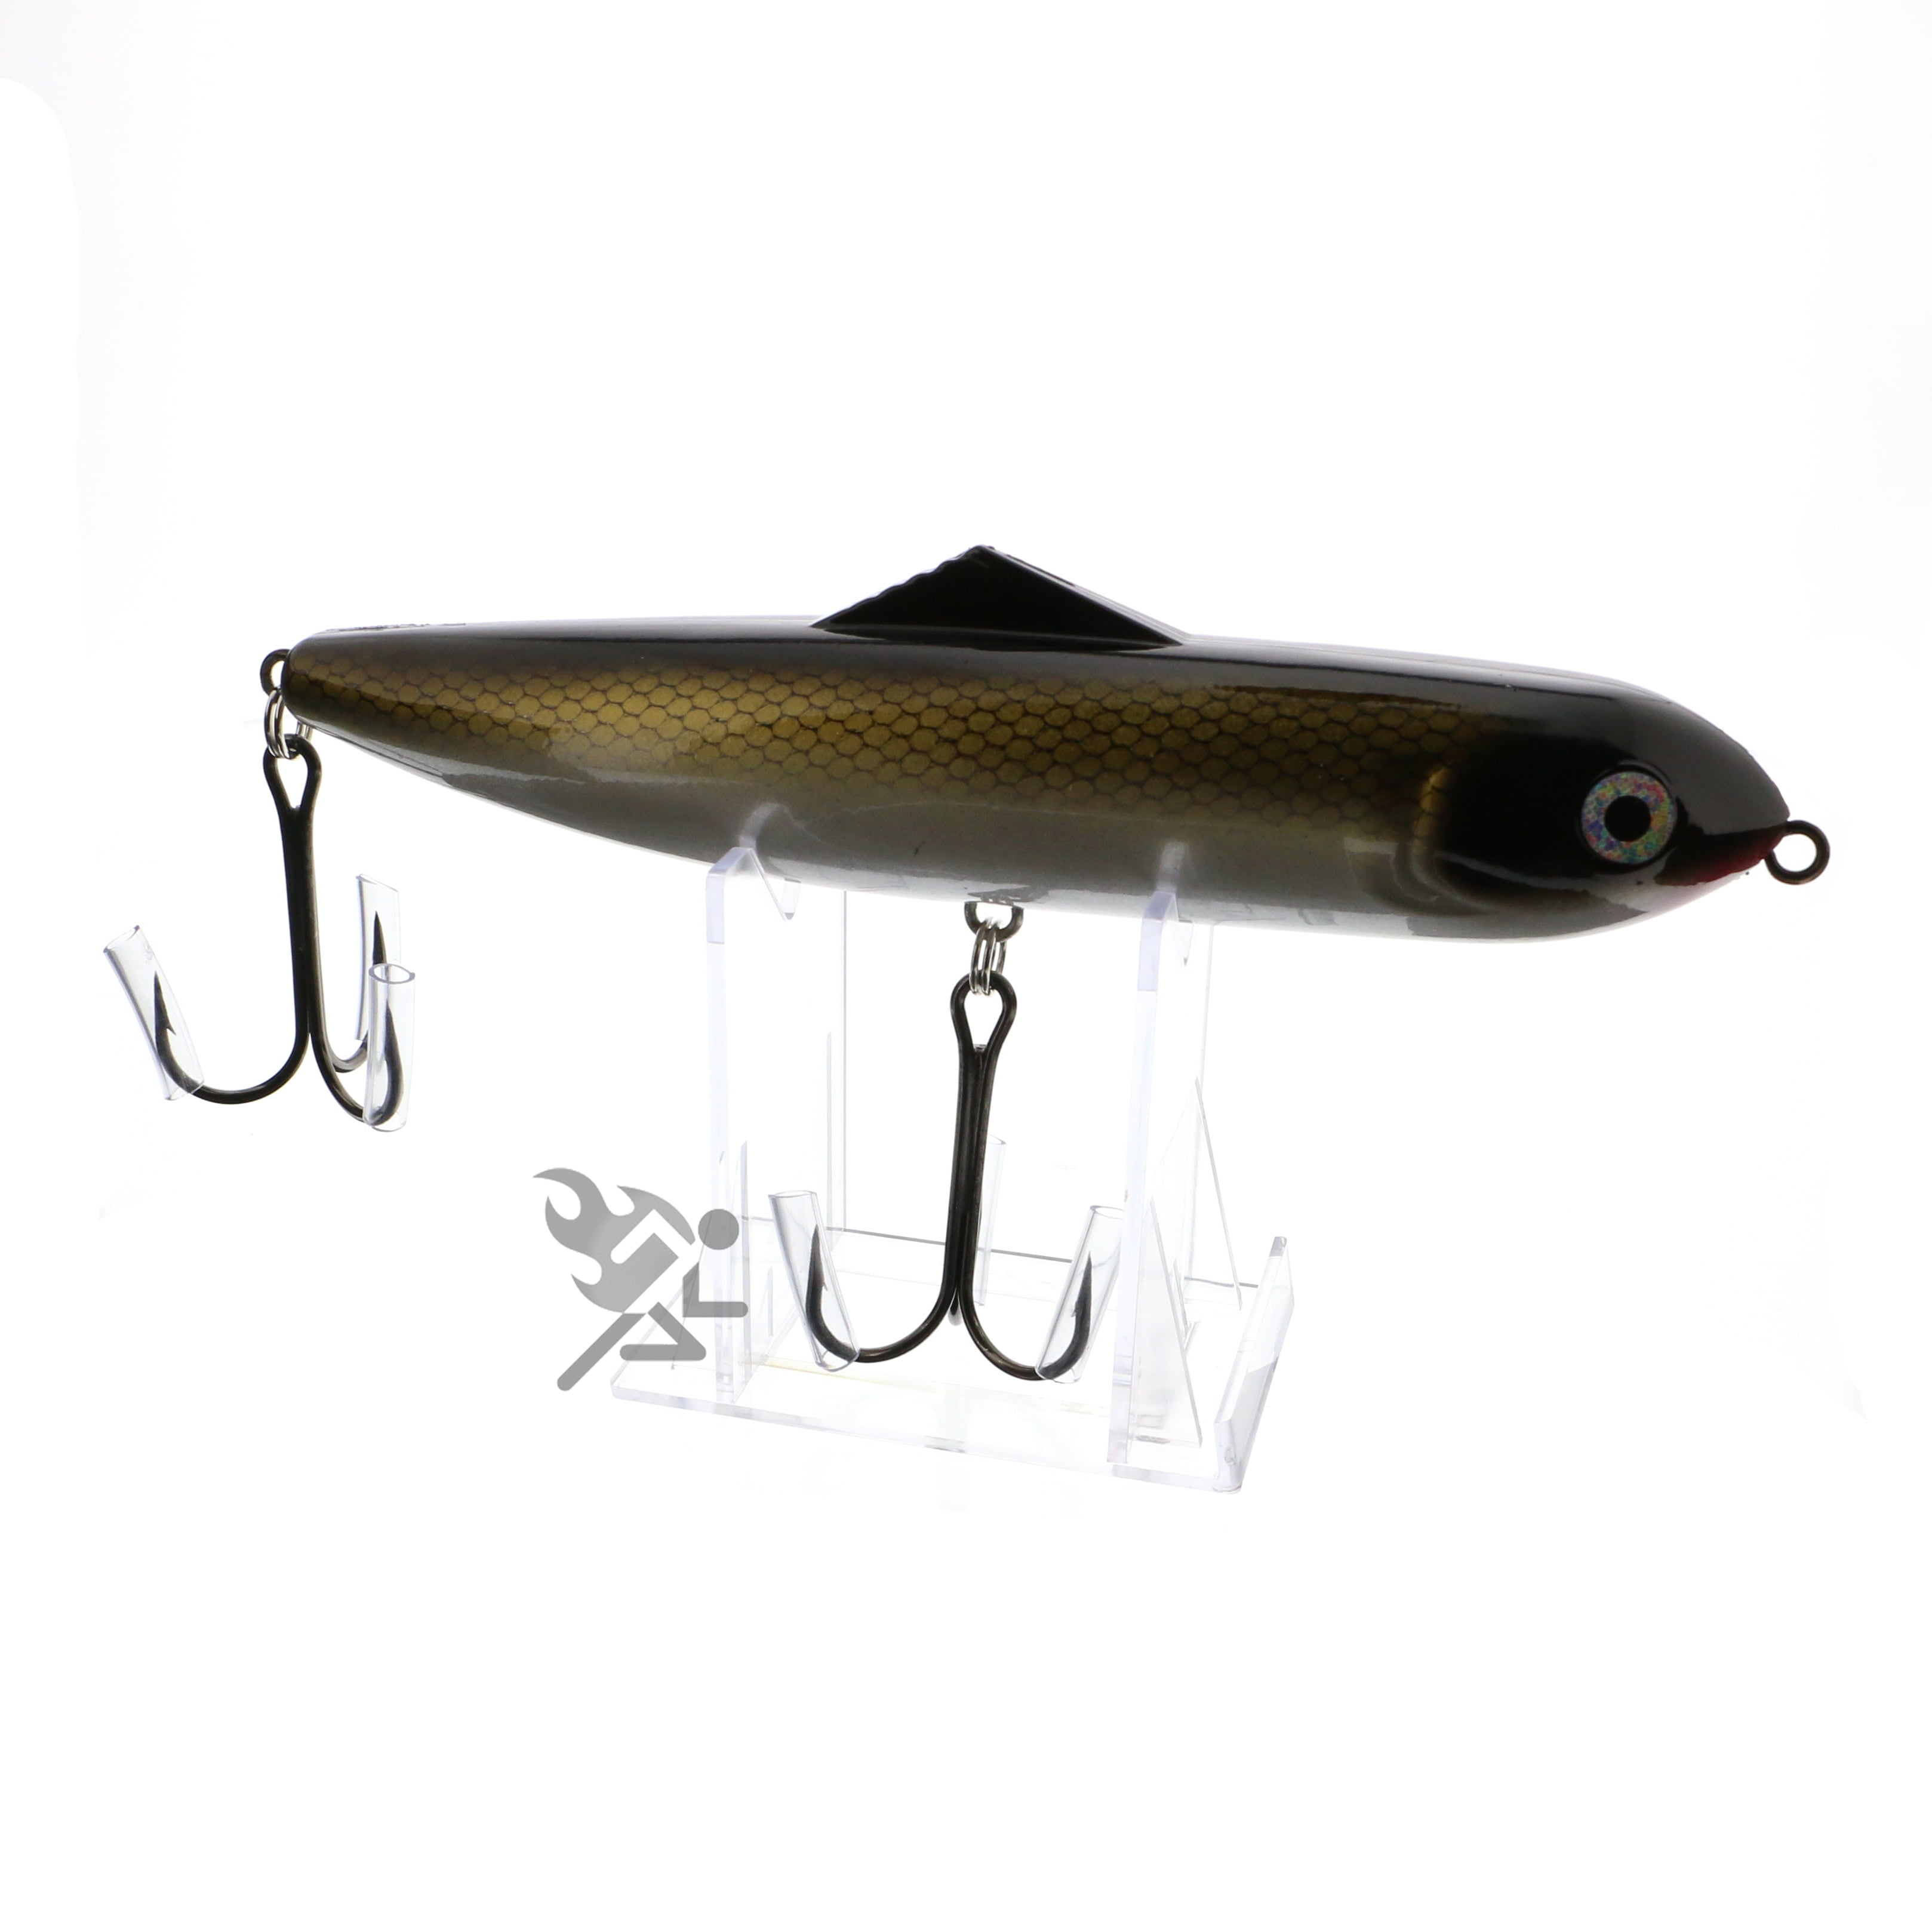 *25 Fishing Lure 2" Display Stand Easels Holders 